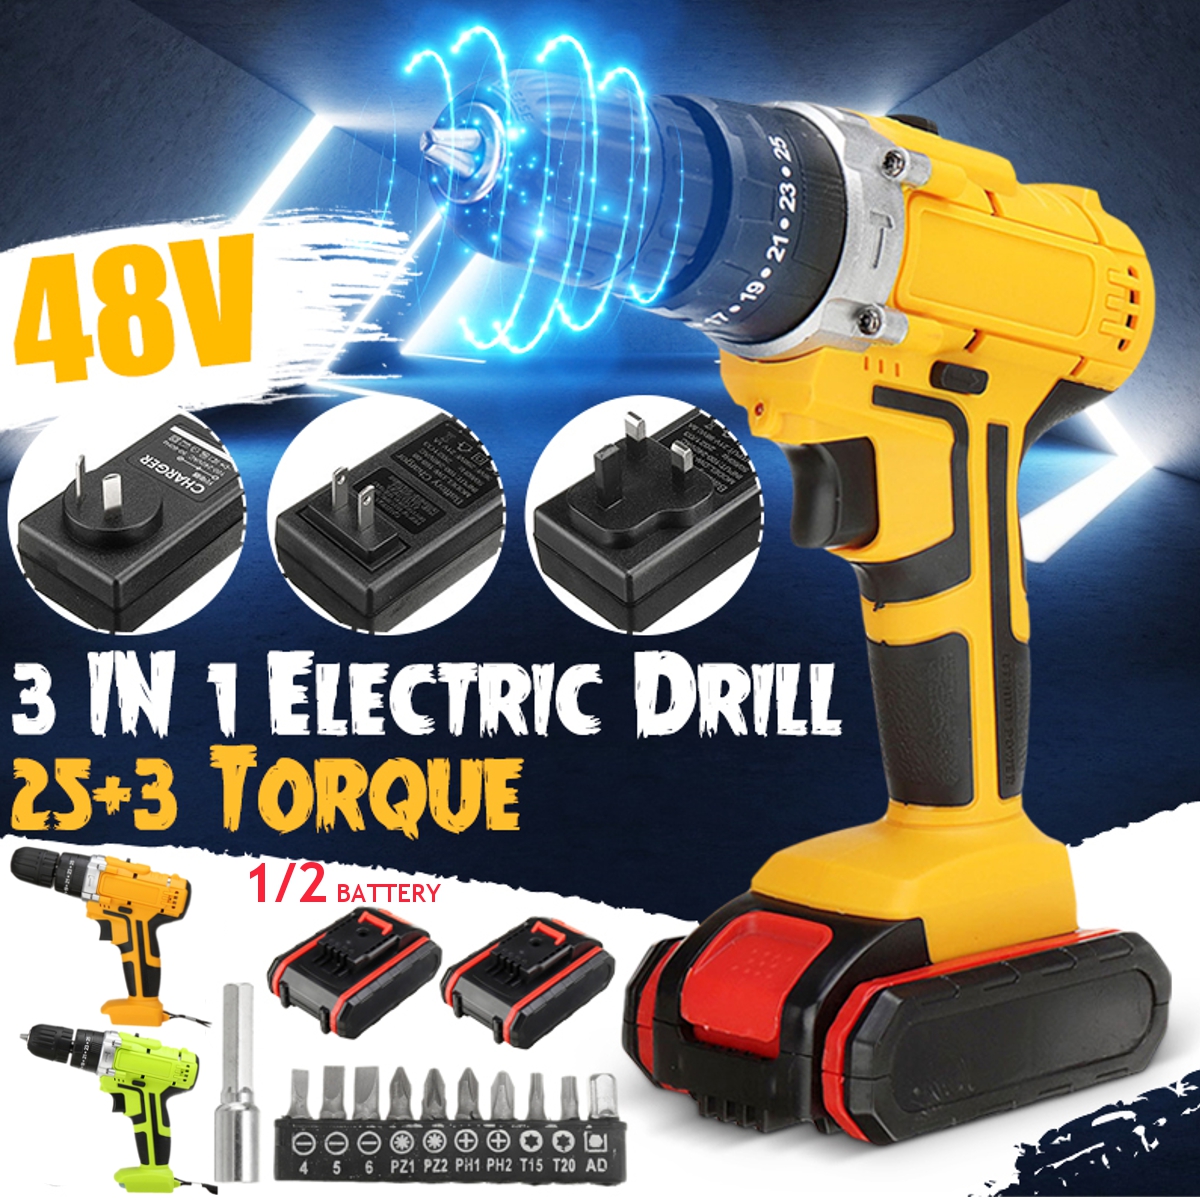 48VF-22800mAh-Cordless-Rechargable-3-In-1-Power-Drills-Impact-Electric-Drill-Driver-With-2Pcs-Batter-1877445-1